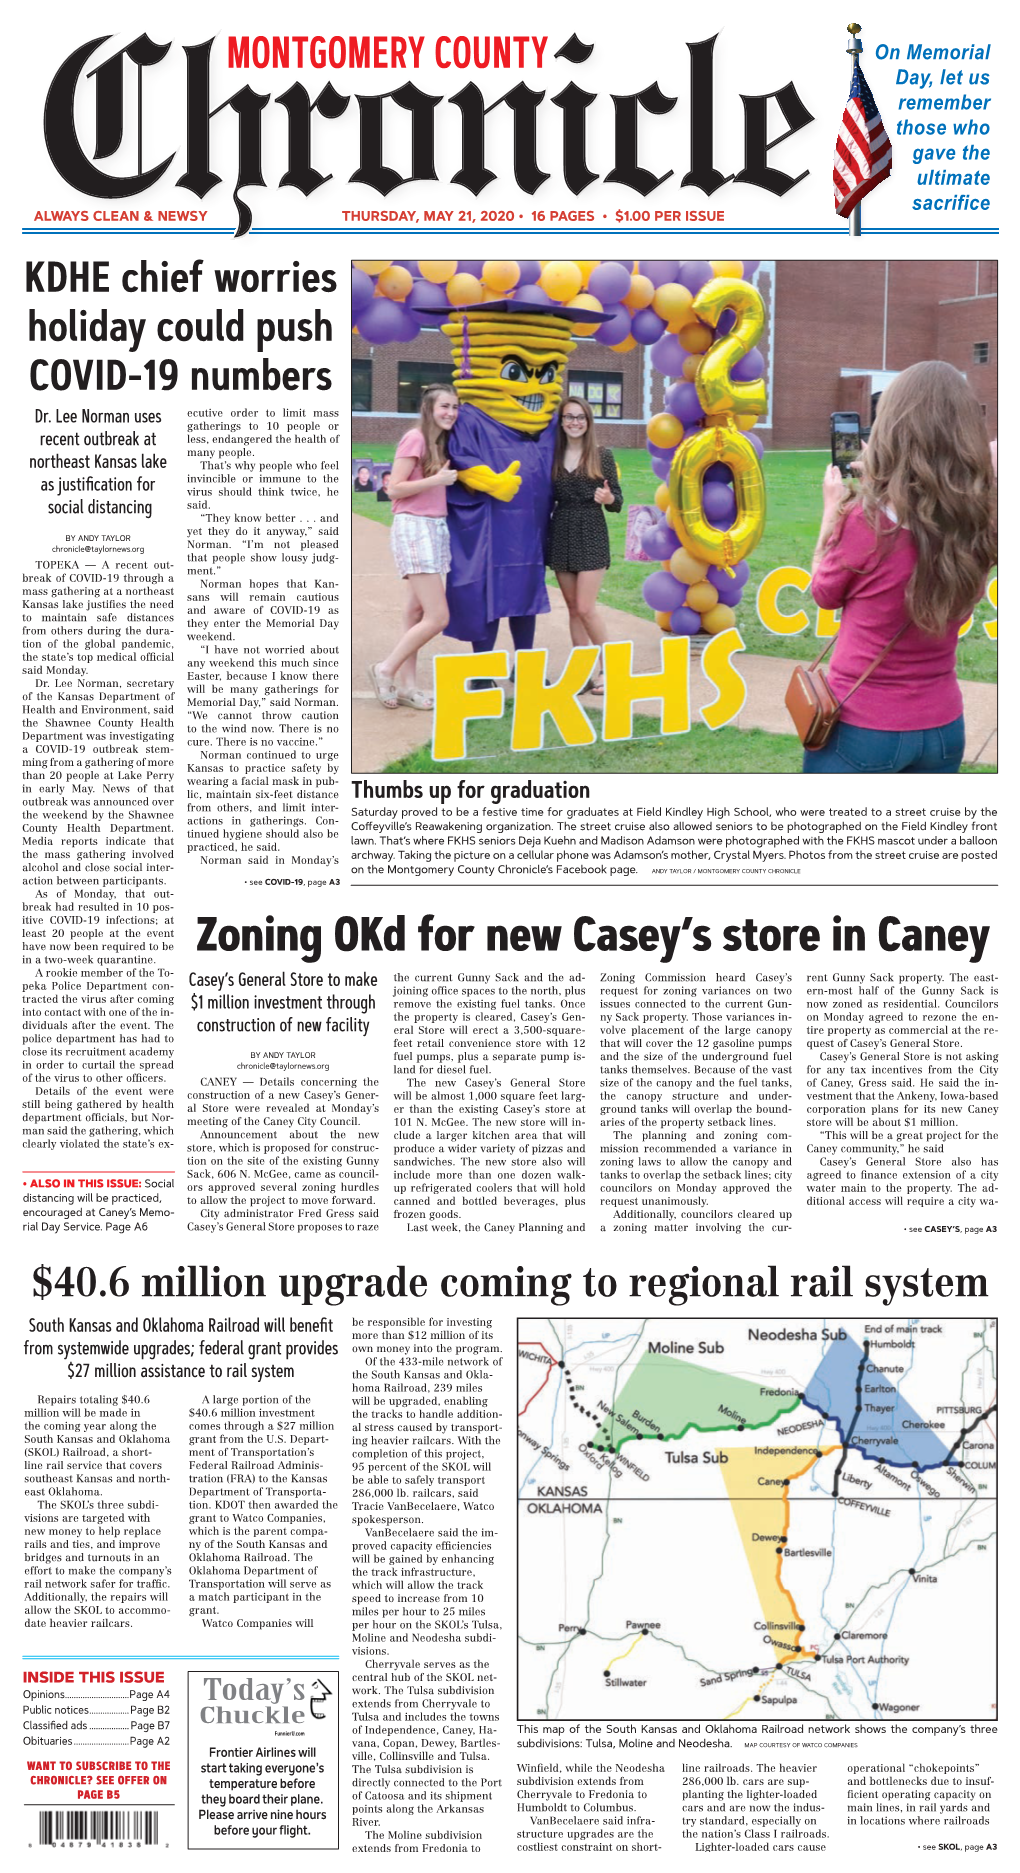 Zoning Okd for New Casey's Store in Caney